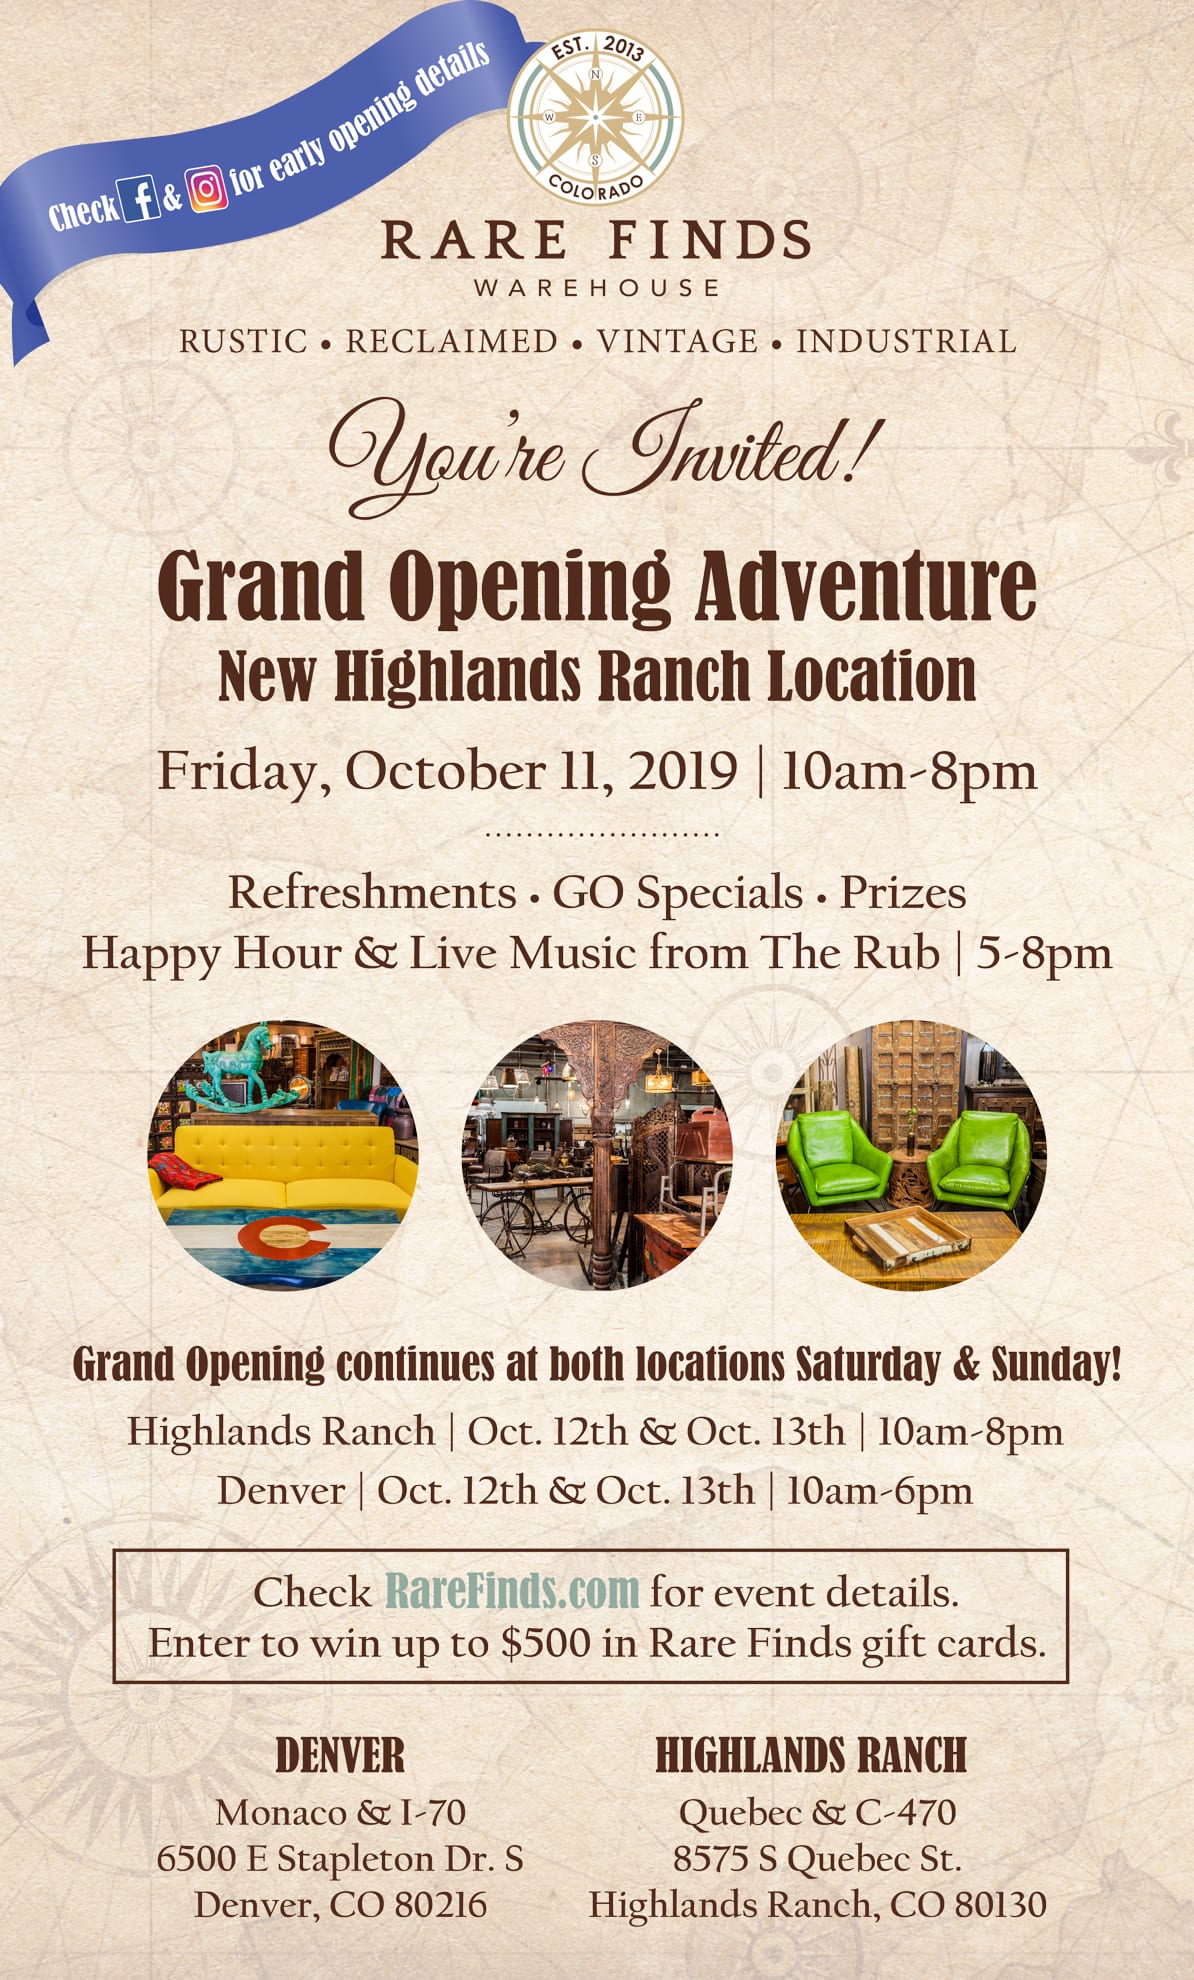 Highlands Ranch Furniture Store is now Open - Join us for our Grand Opening Adventure on October 11, 2019